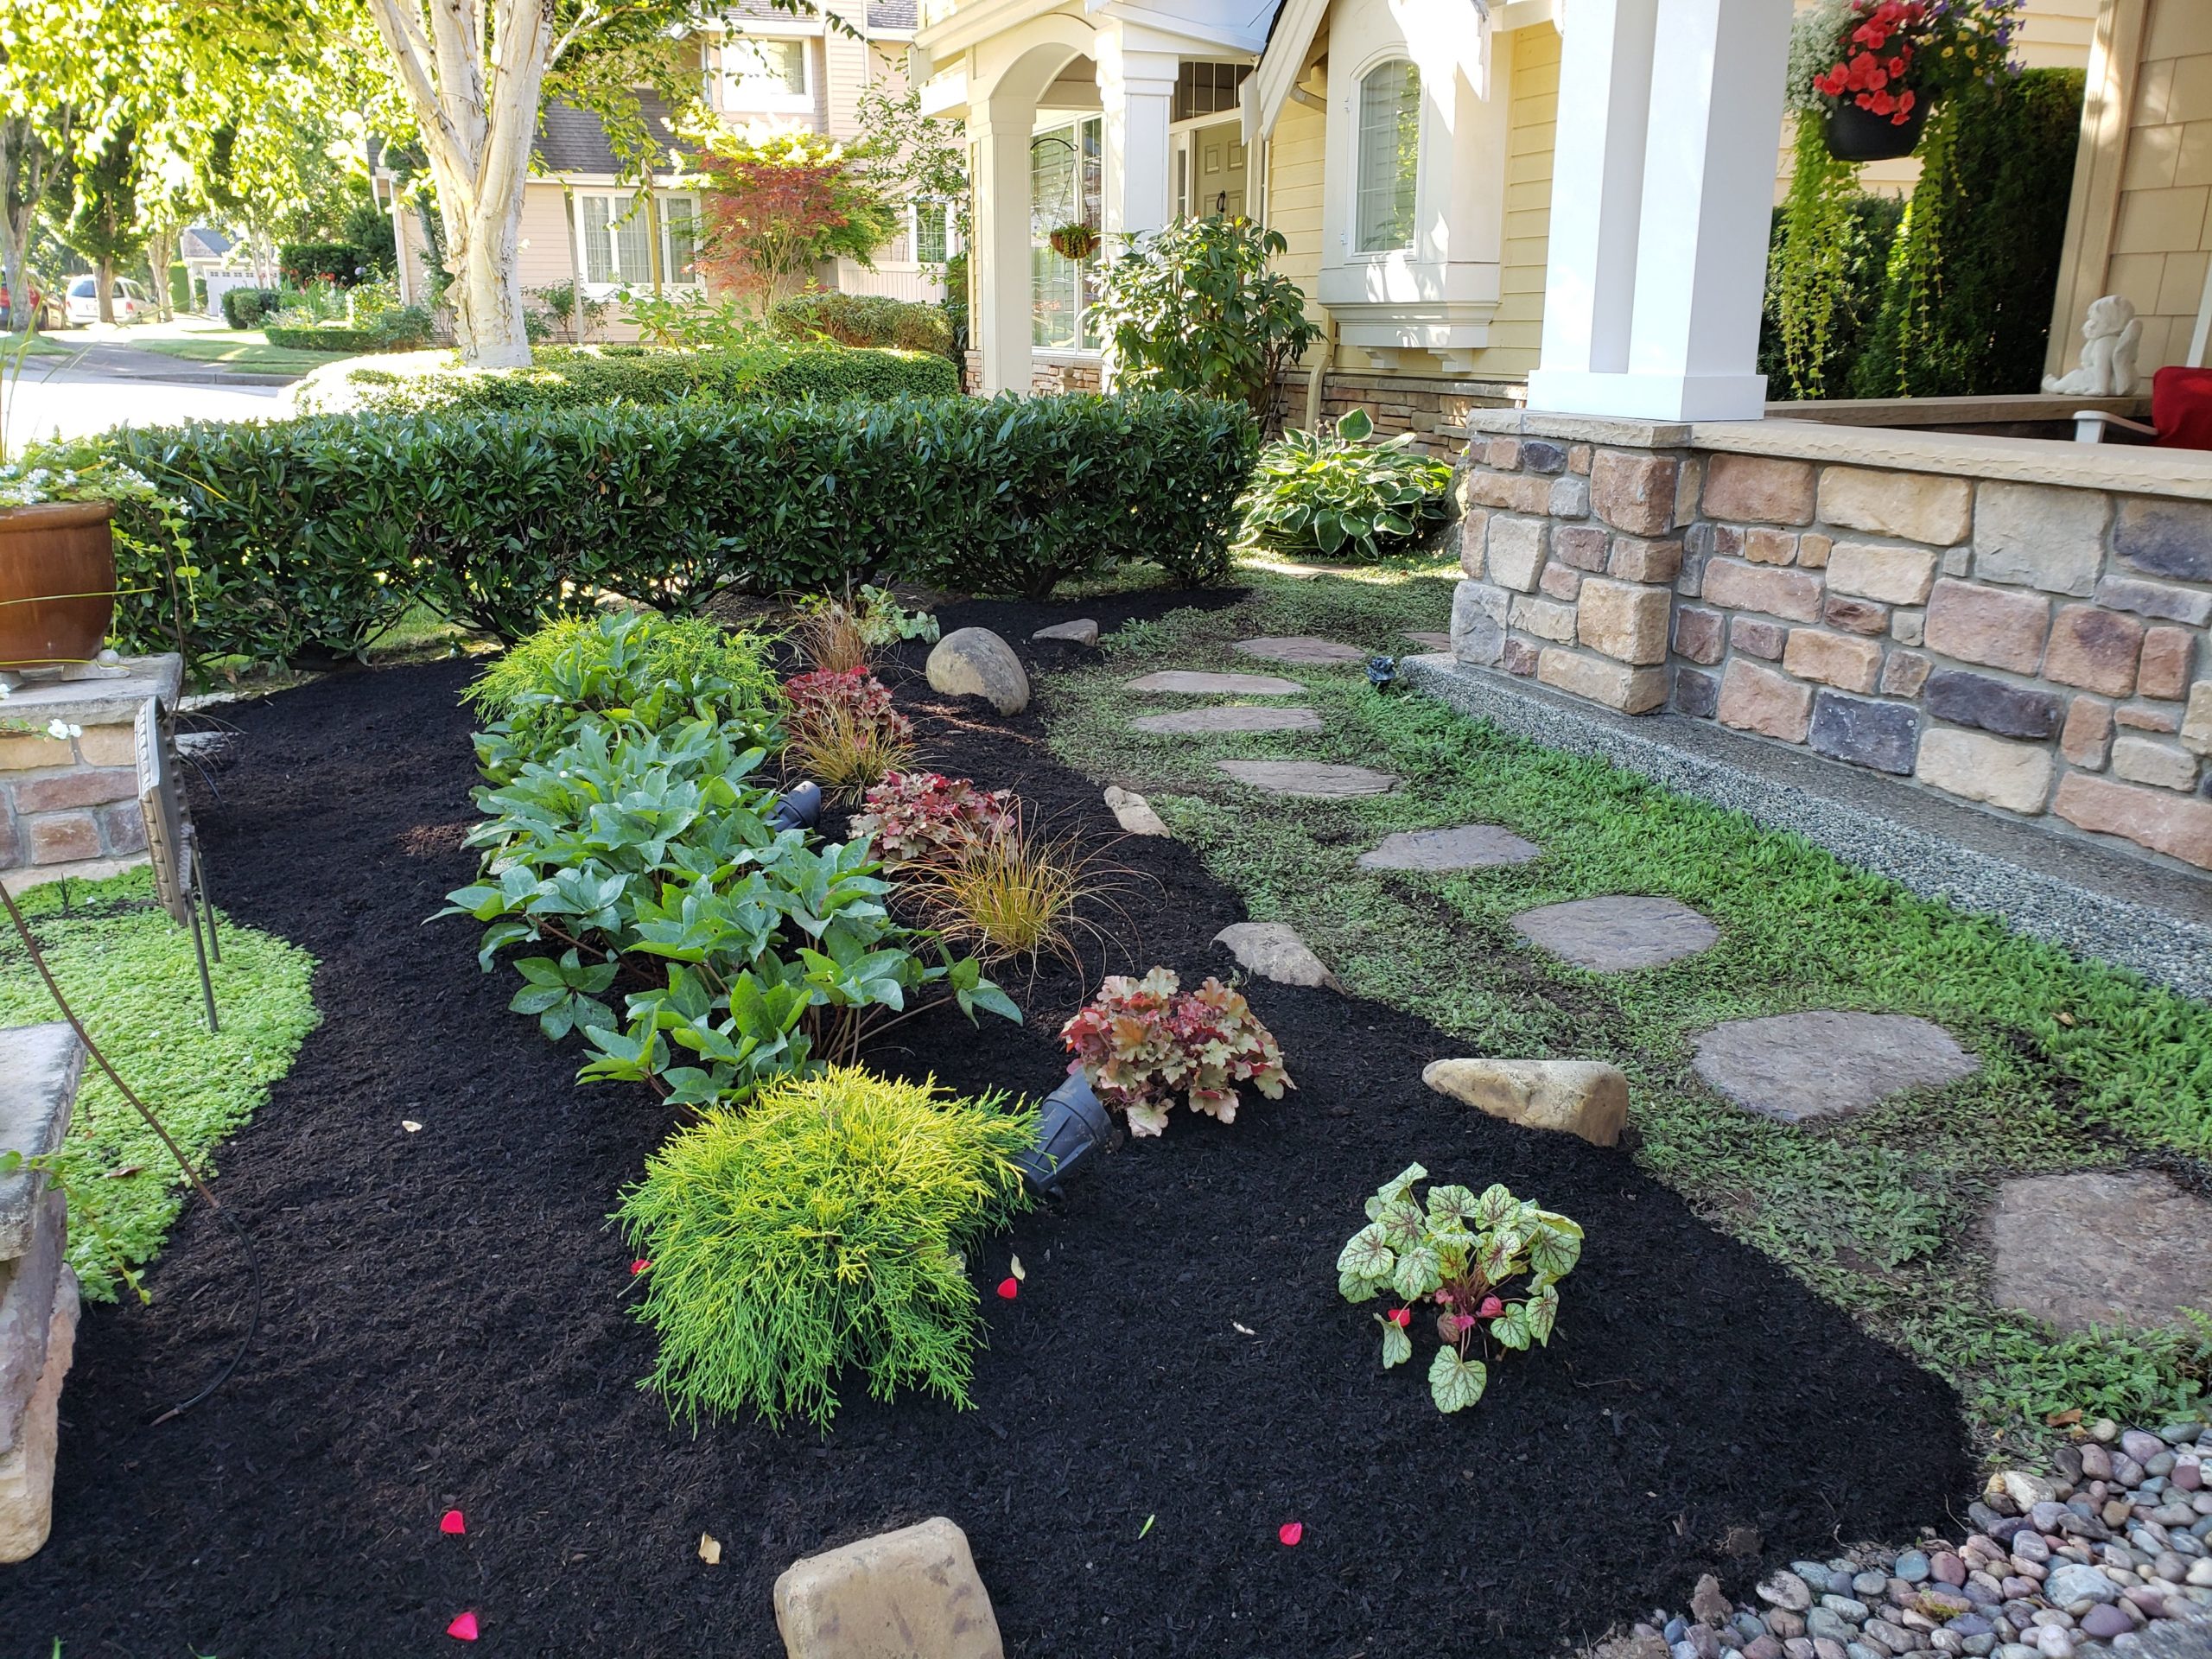 5 Materials Never to Use as Garden or Lawn Edging